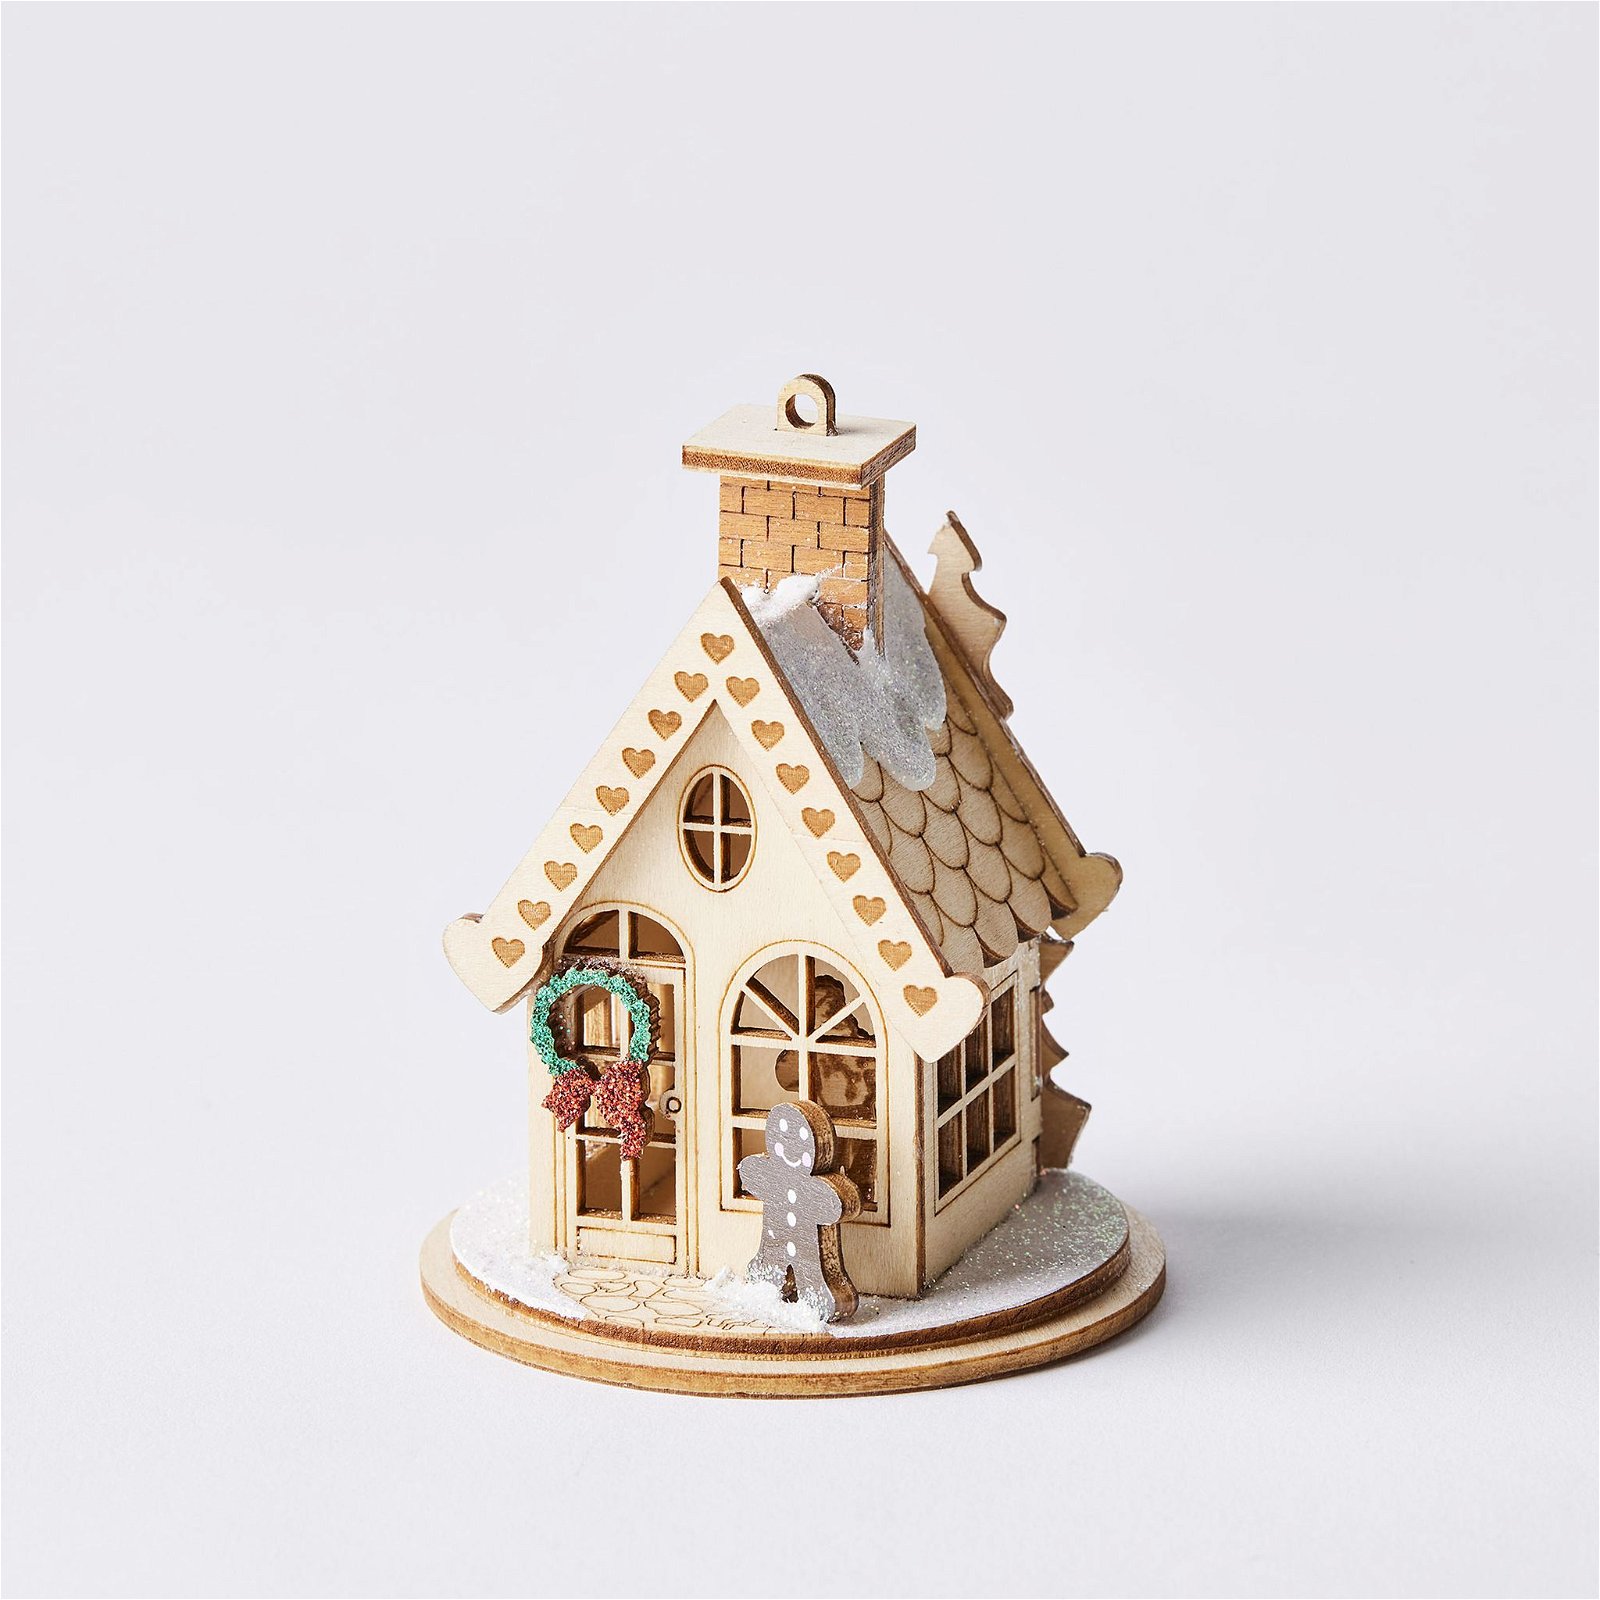 Light-up Wood Gingerbread House Ornaments